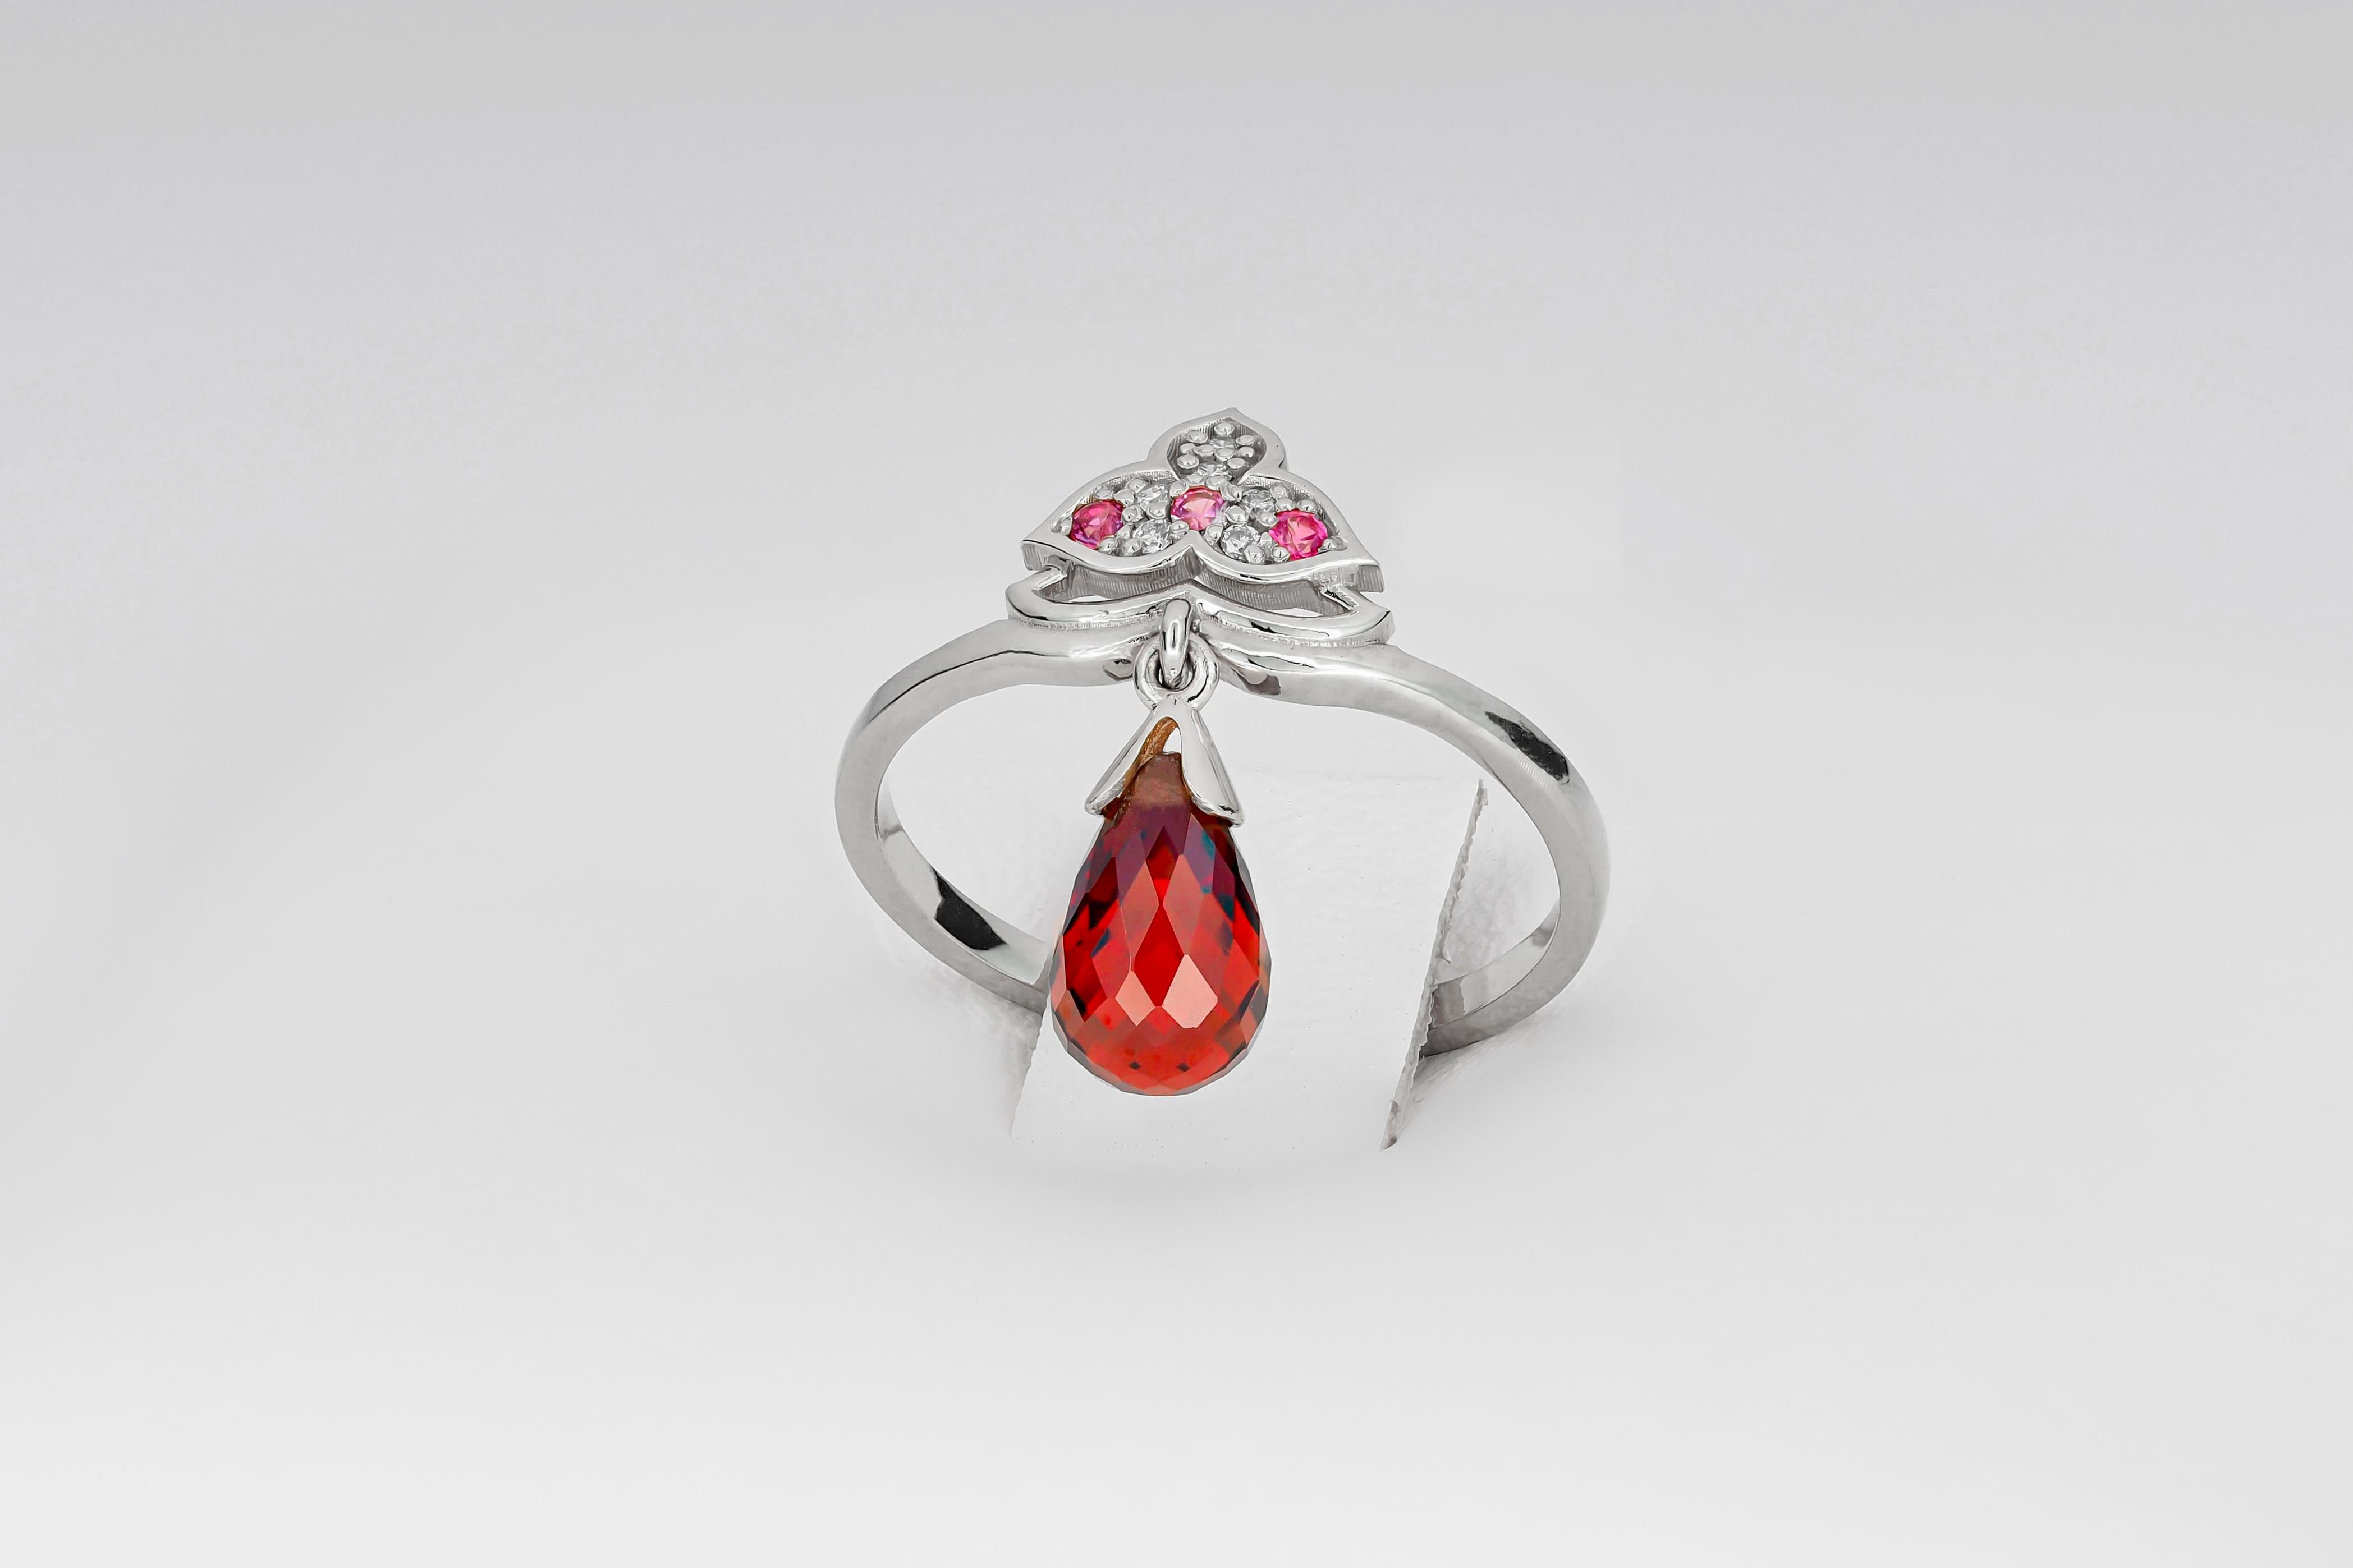 For Sale:  14k Gold Lotus Ring with Garnet, Sapphires and Diamonds 7